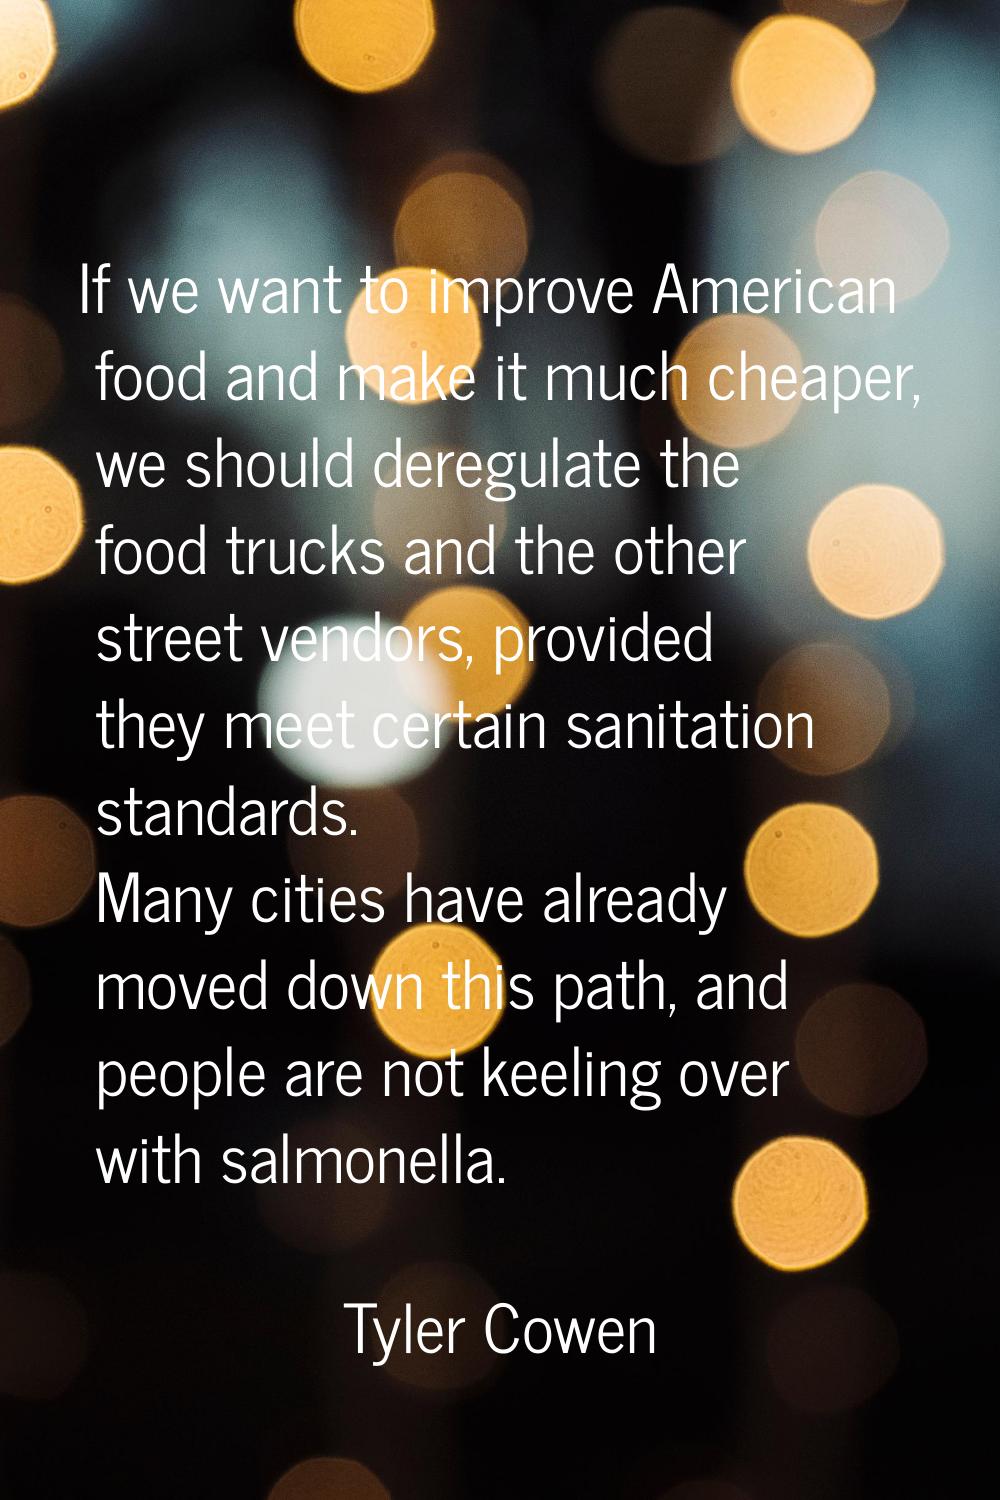 If we want to improve American food and make it much cheaper, we should deregulate the food trucks 